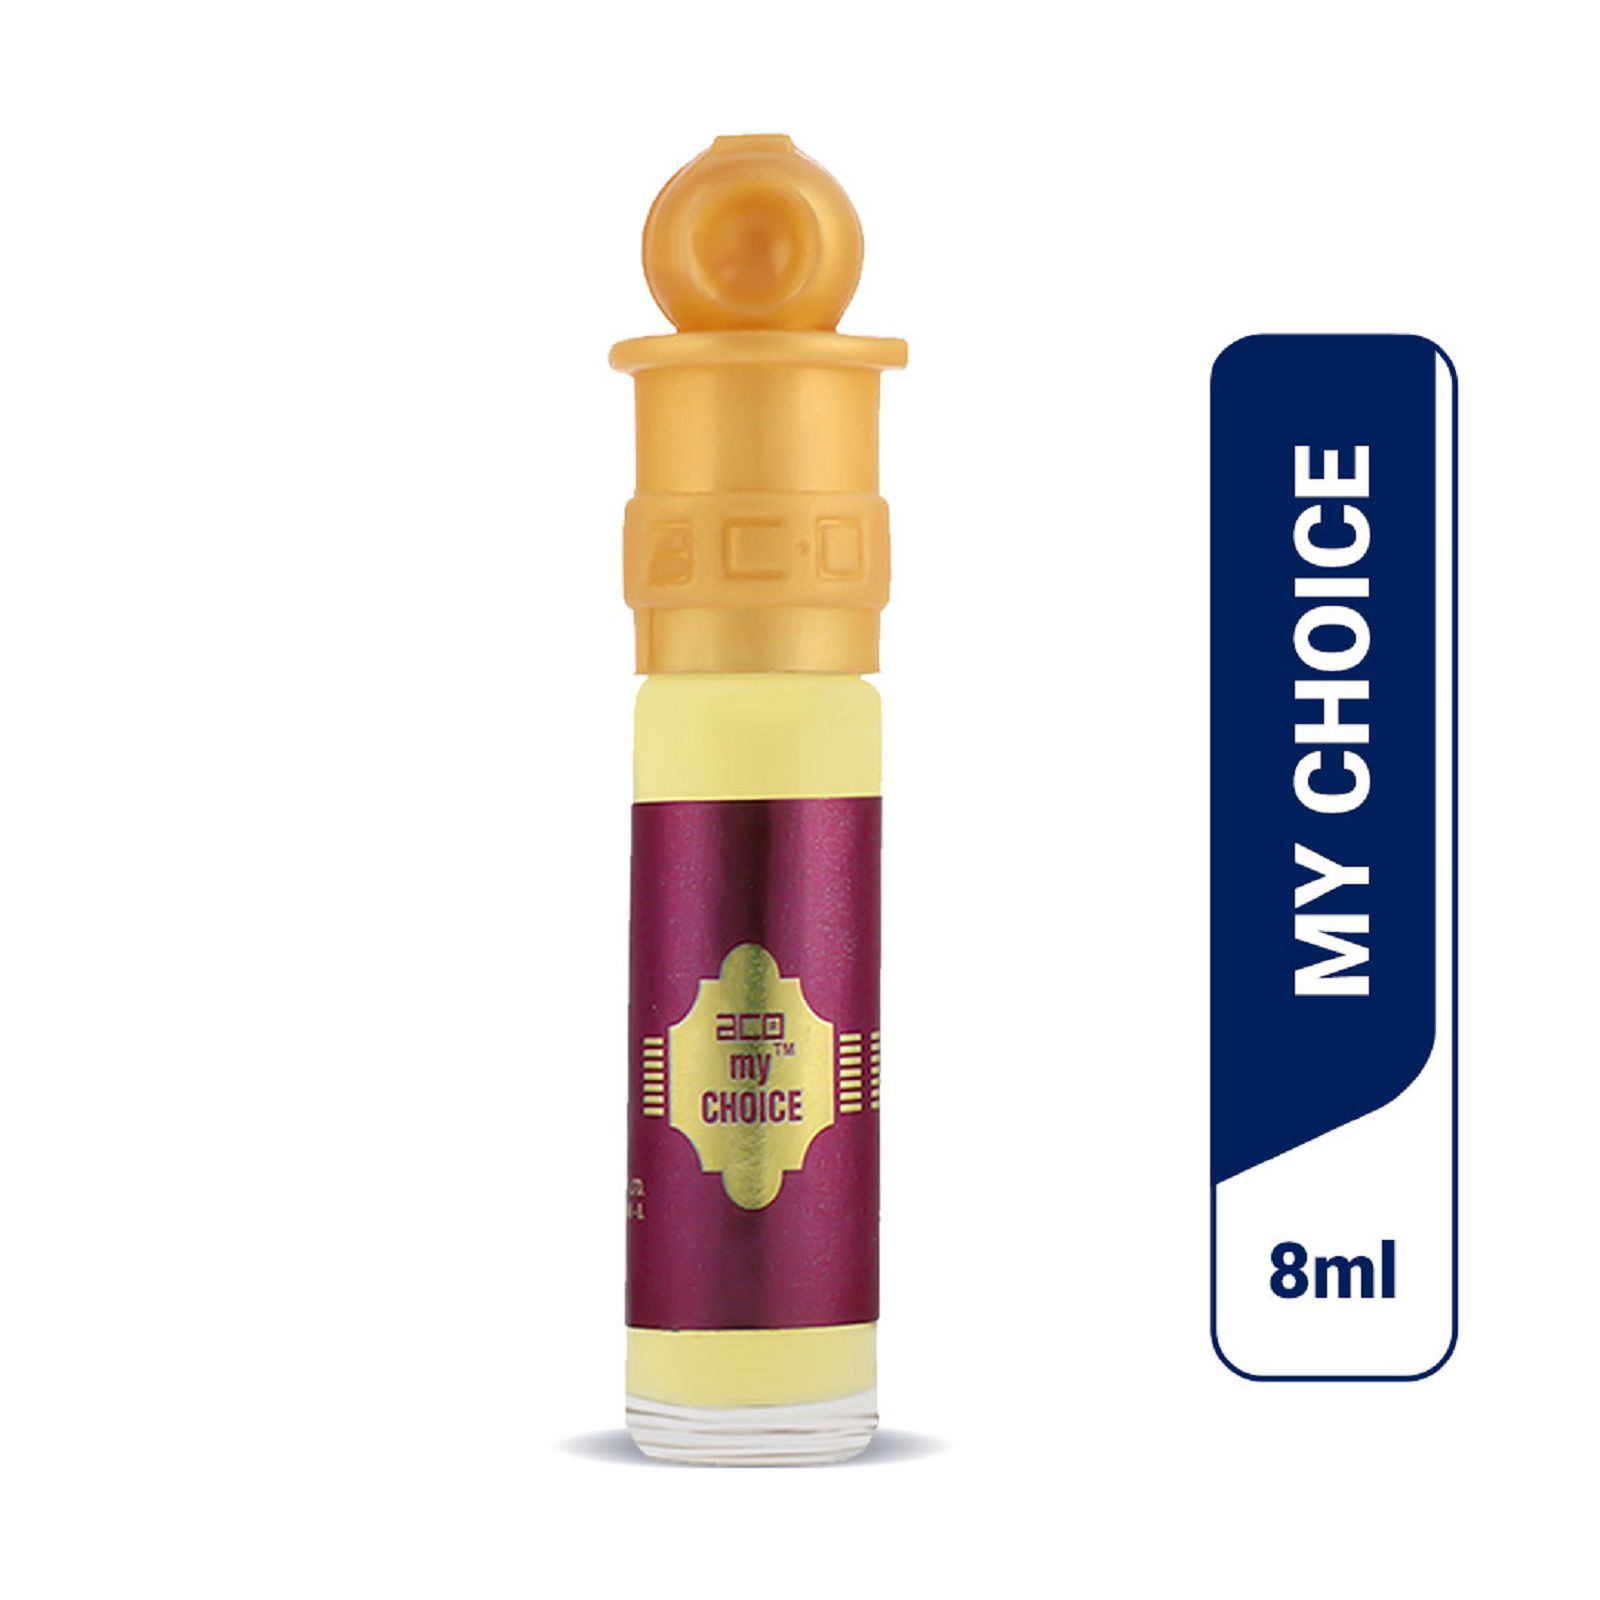     			aco perfumes MY CHOICE  Concentrated  Attar Roll On 8ml